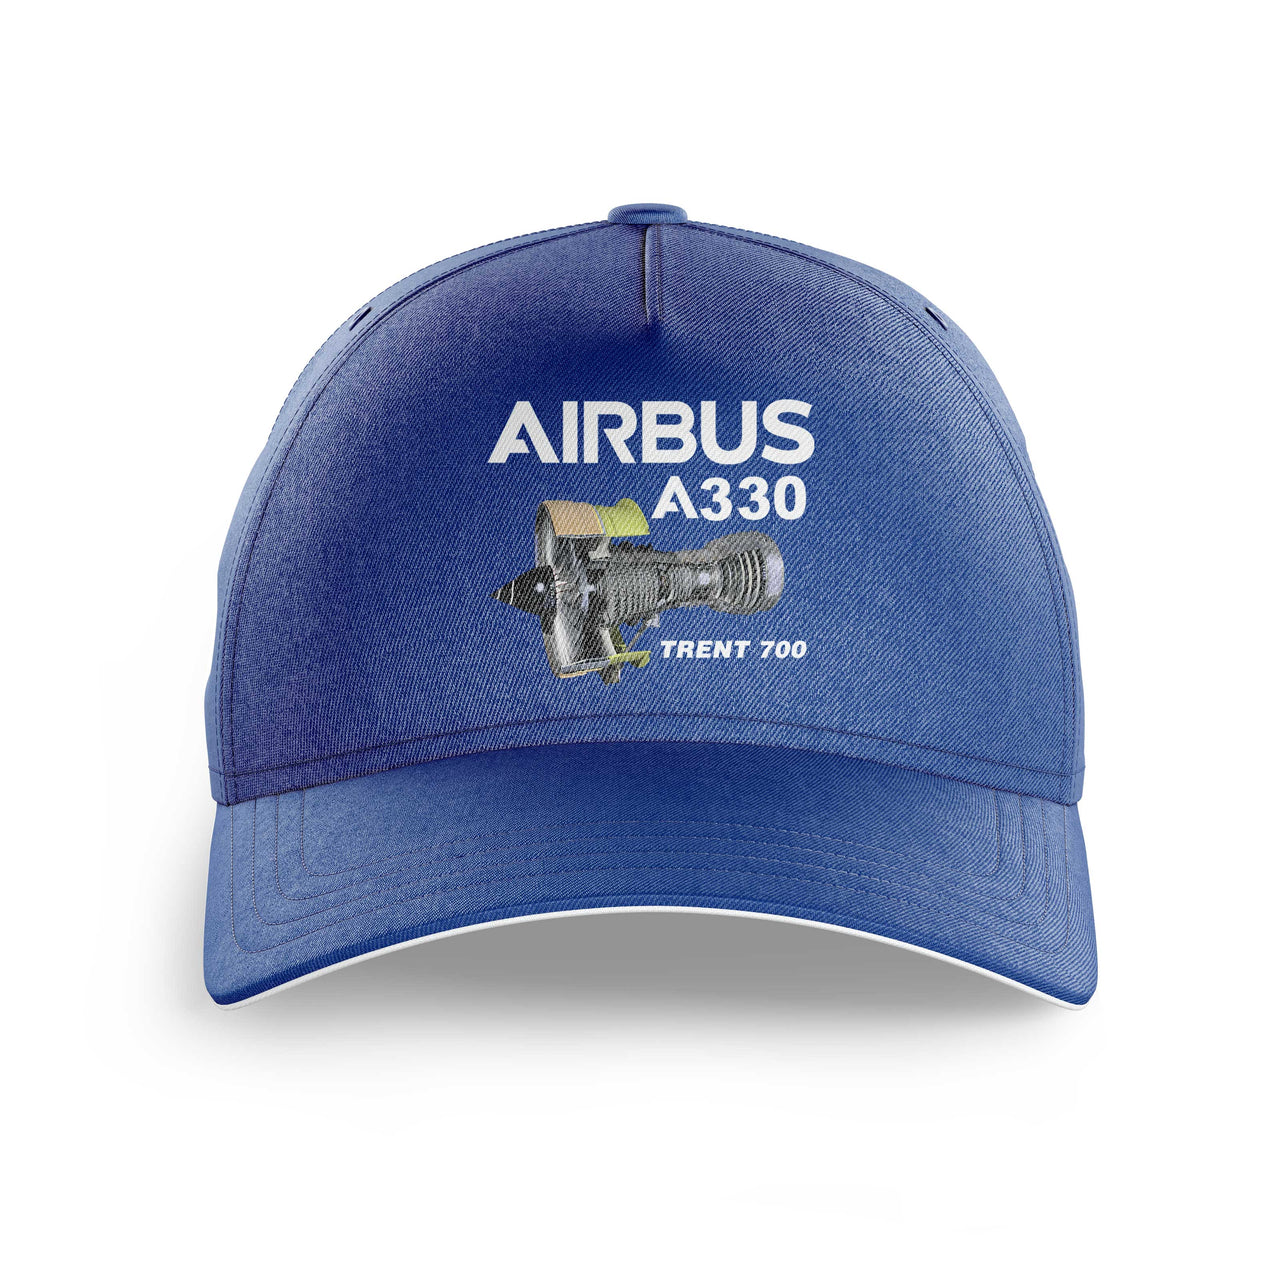 Airbus A330 & Trent 700 Engine Printed Hats